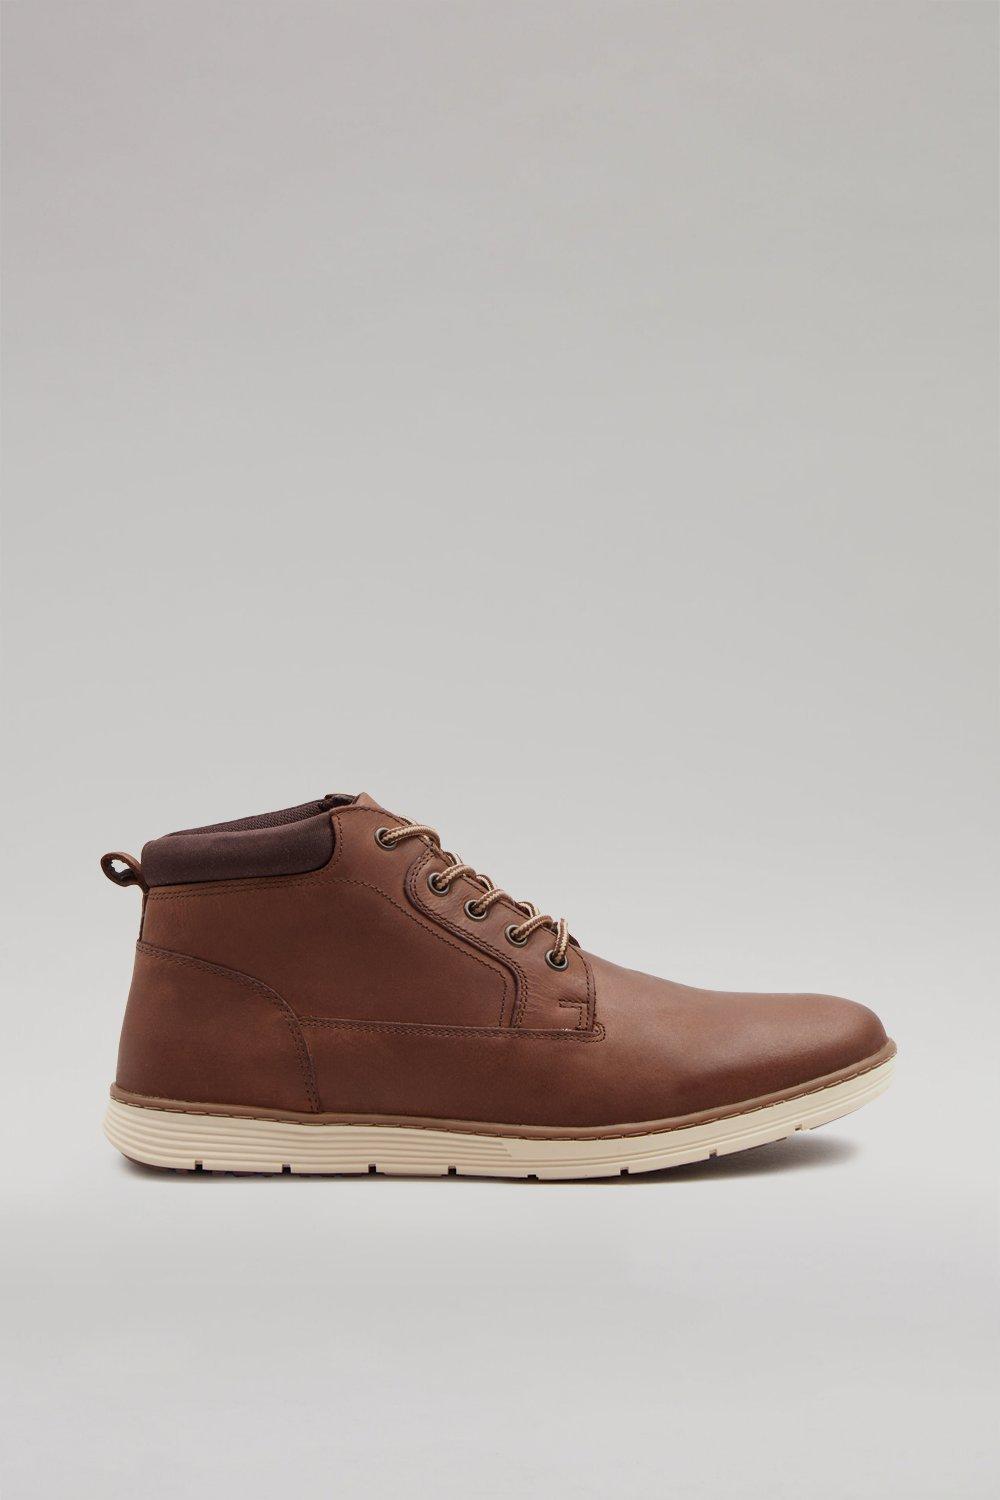 Mens Casual Suede Chukka Boots - Brown - 7